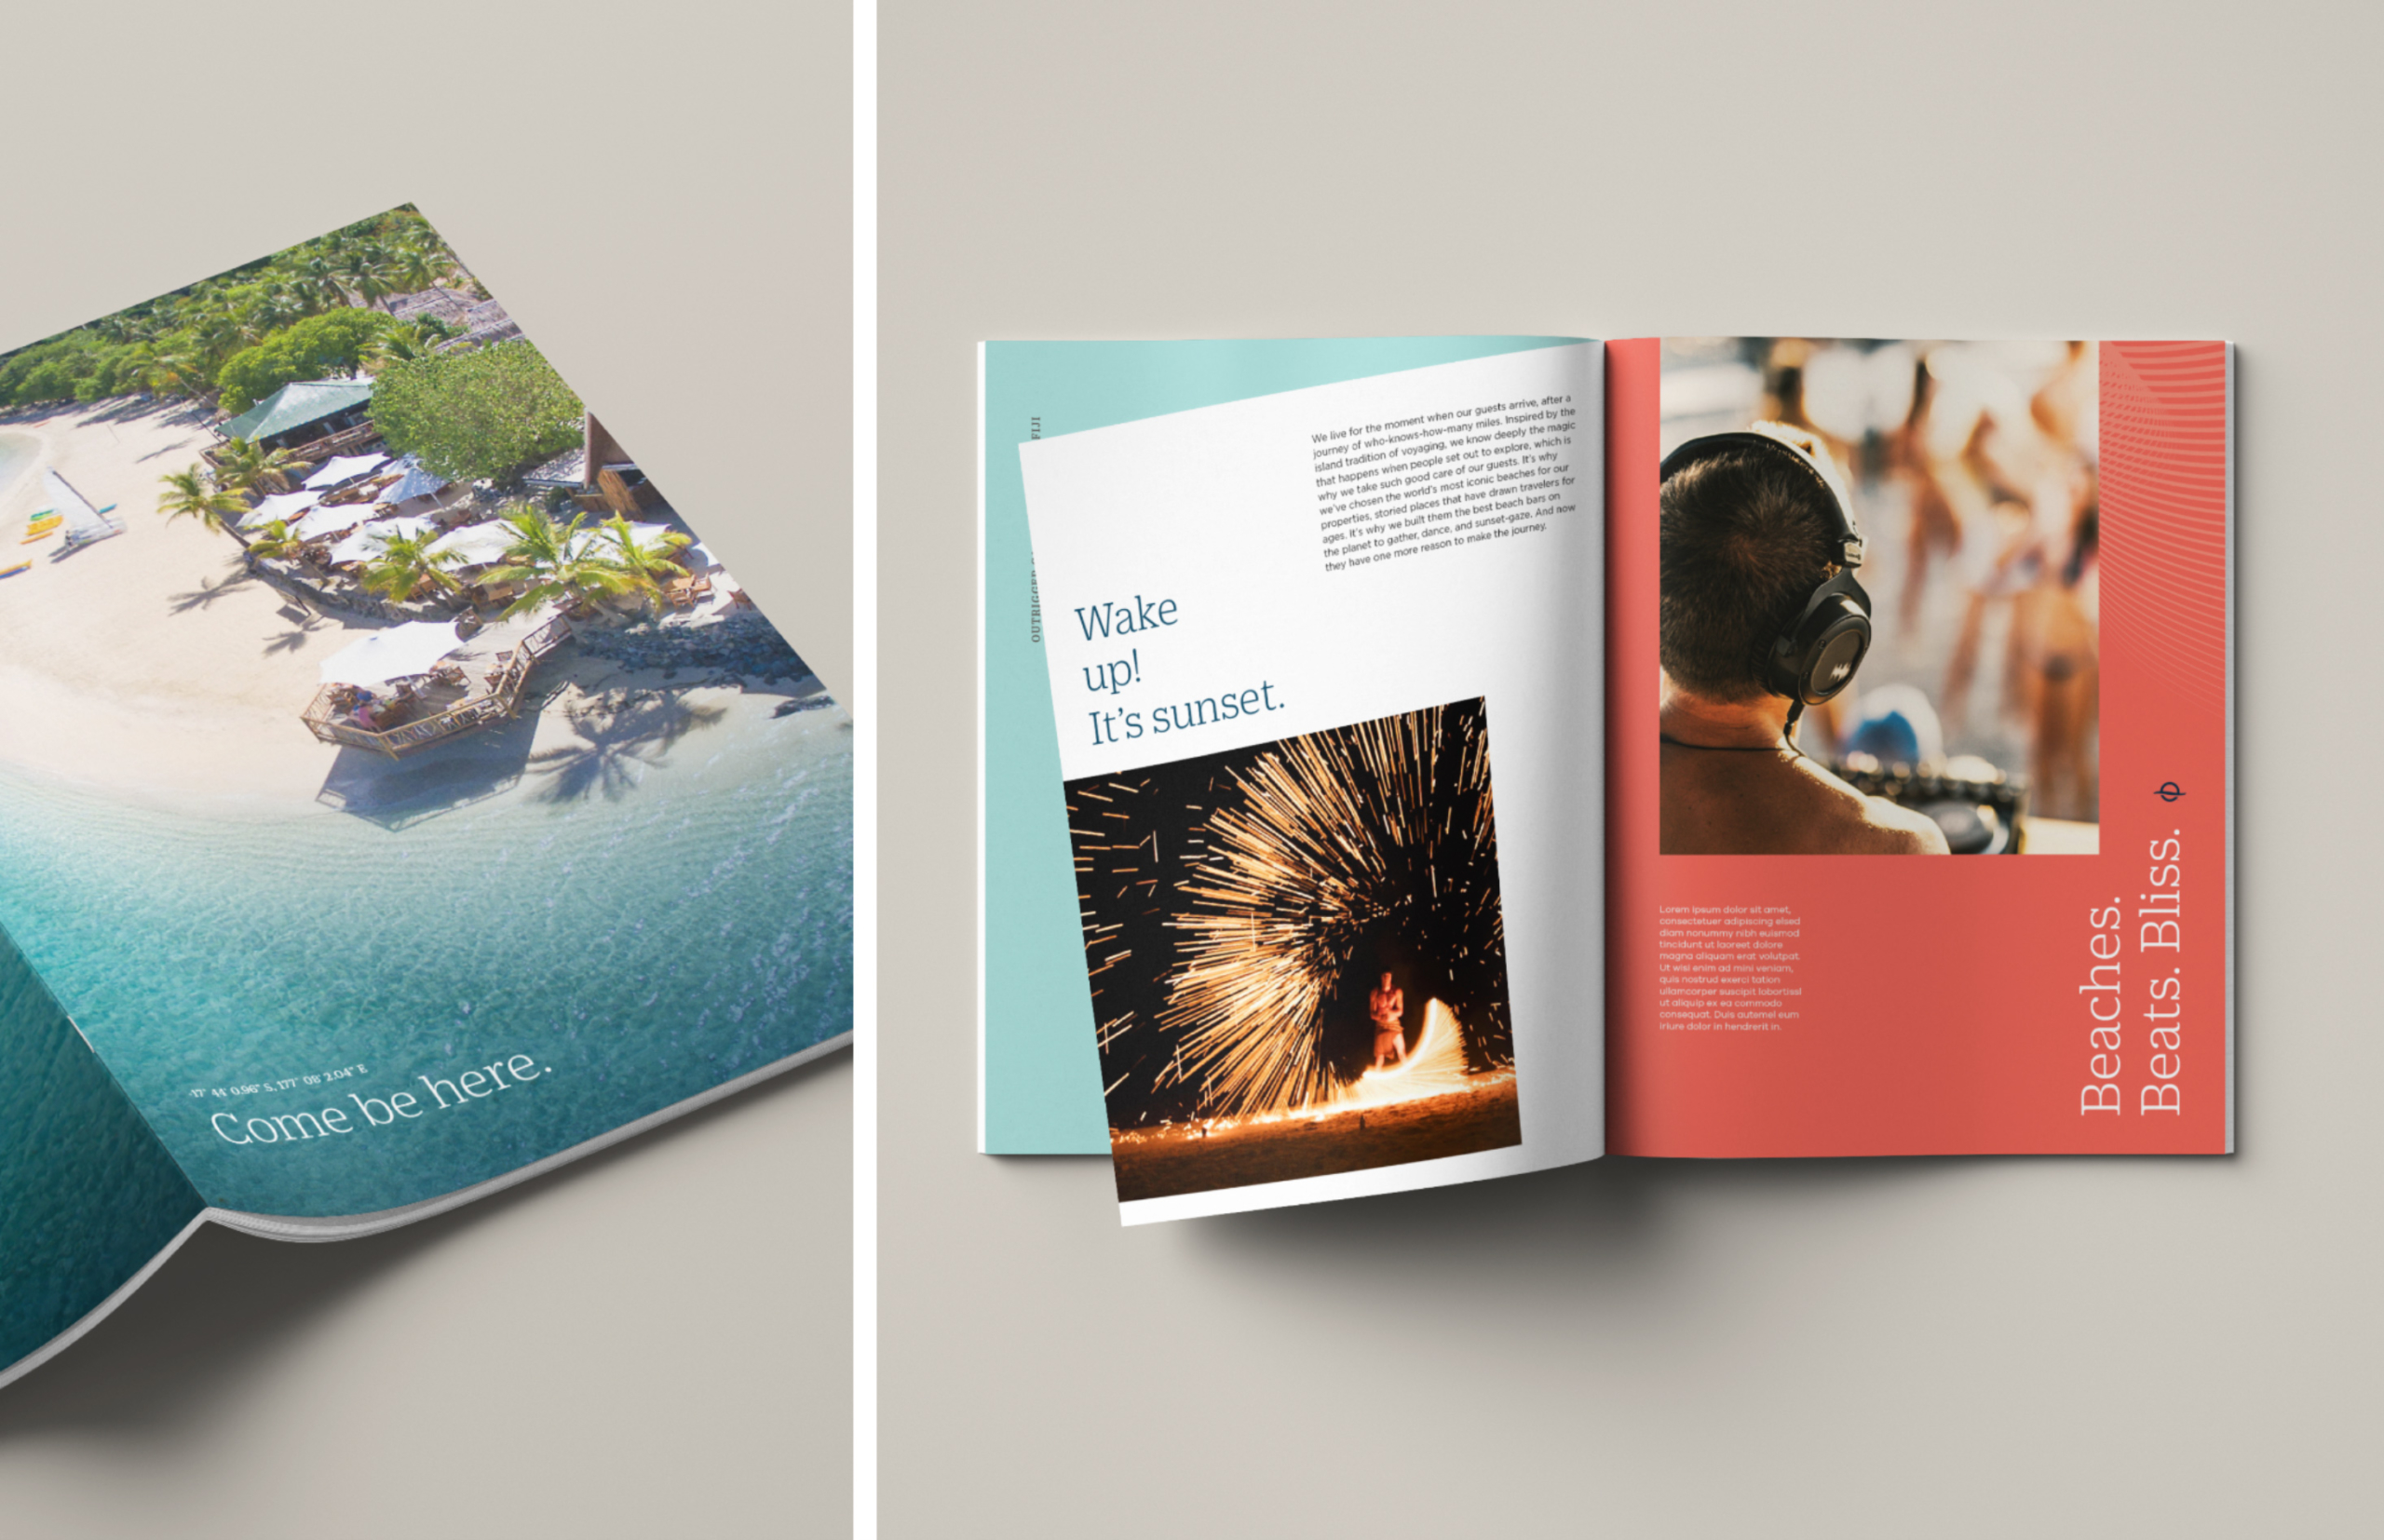 two pane image, left side is an open magazine face down with a picture of an island resort featuring umbrellas by the sand and clear blue water. The cover reads, “Come be here”. Right side is an open magazine with the page in mid flip, the left page reads, “Wake up! It’s sunset.” with a photo of a fire twirler, the right page is a bright coral color with a photo of a DJ and copy reading, “Beaches. Beats. Bliss.”